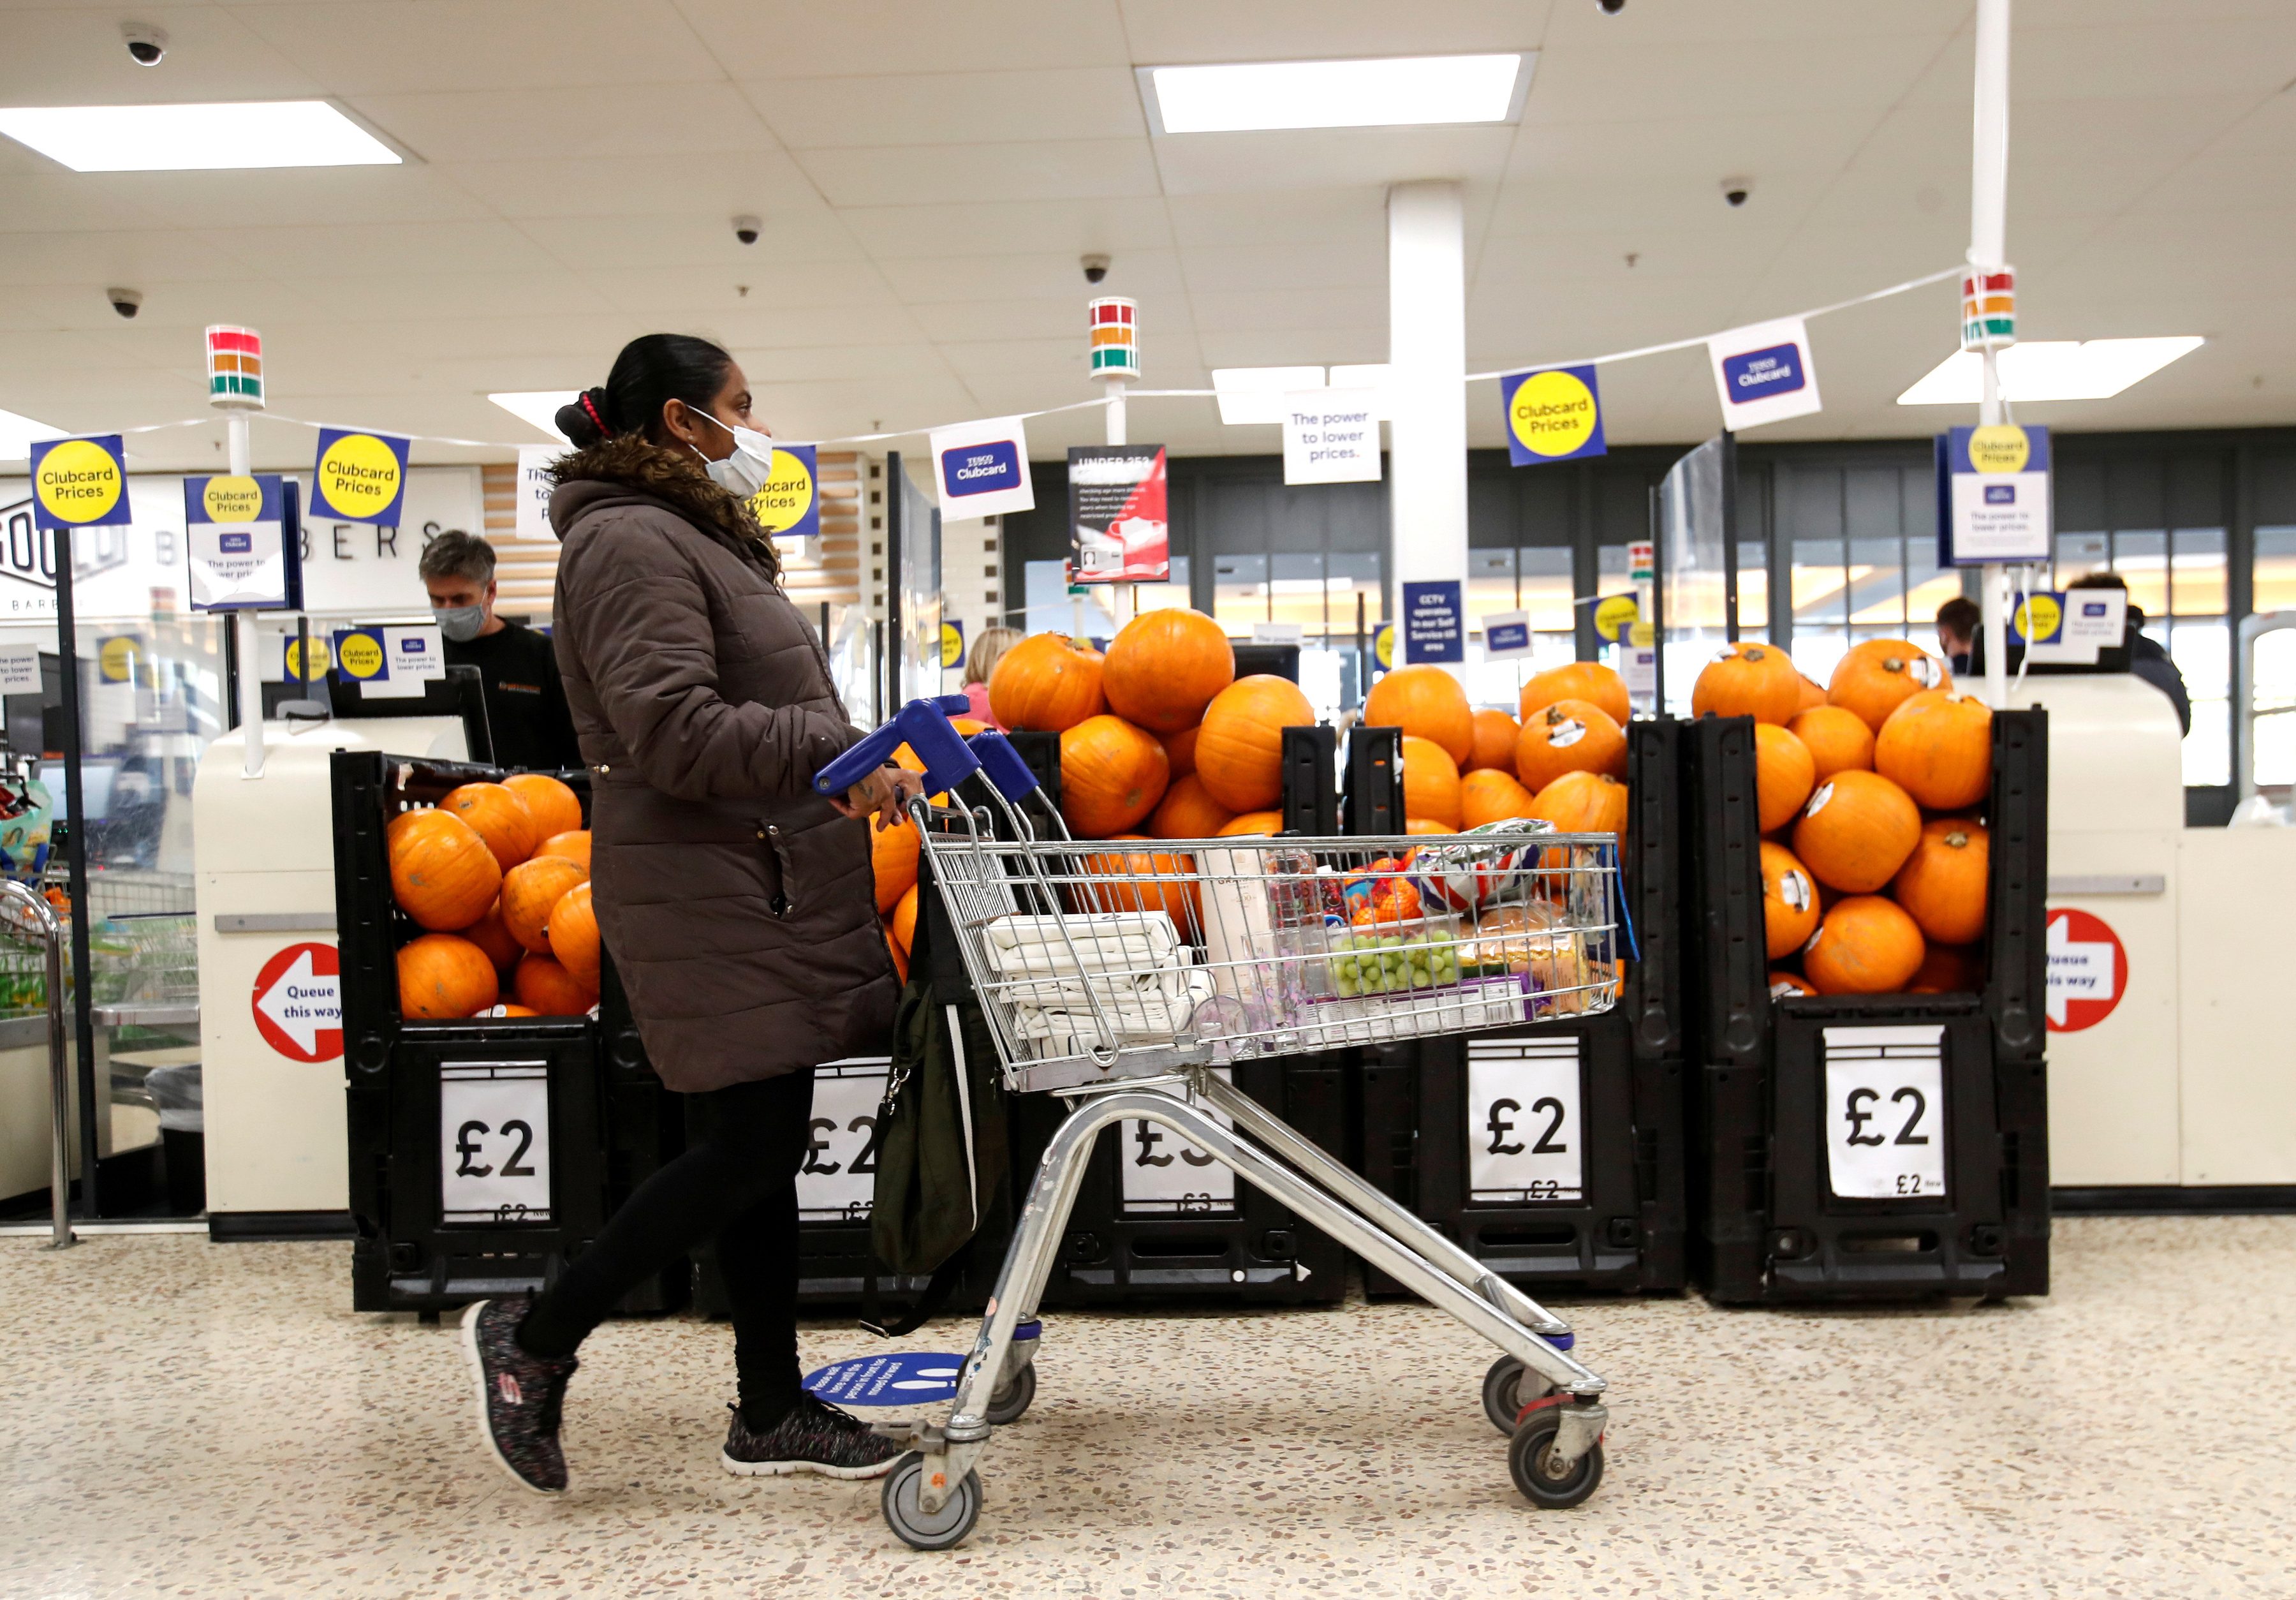 No mask, no shop: UK supermarkets insist on face coverings